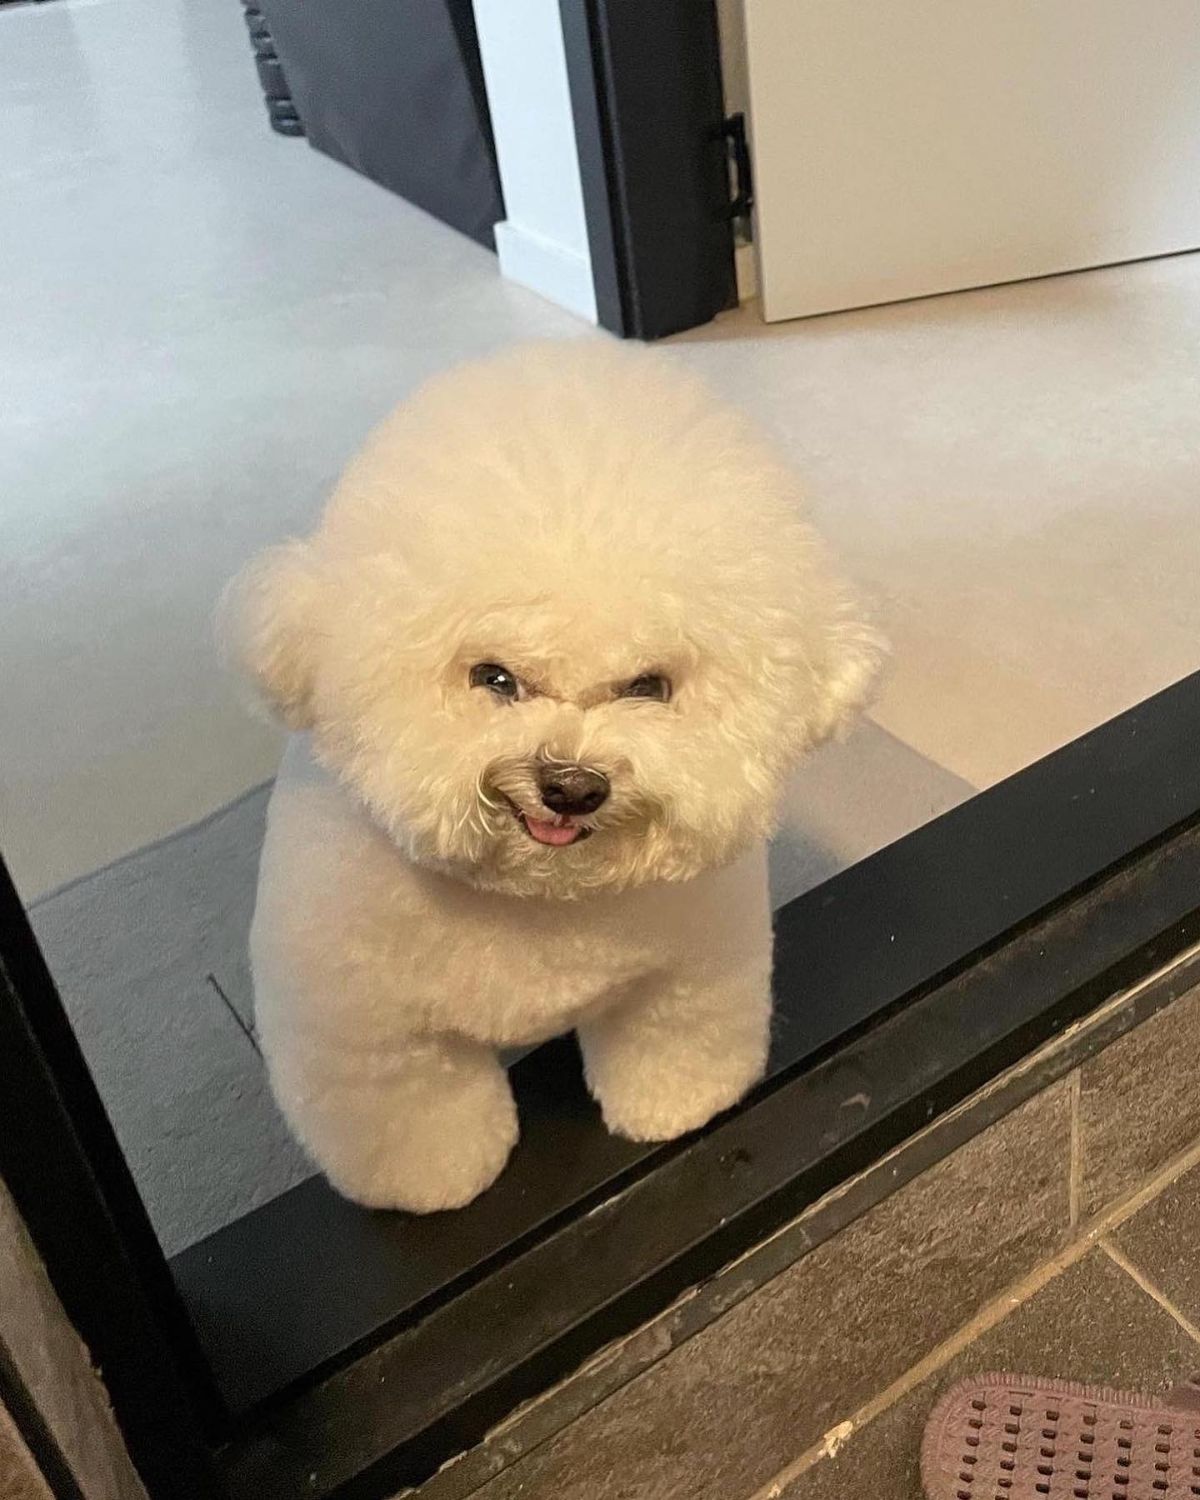 small fluffy white dog standing at a black doorway and looking angry with the tongue poking out slightly